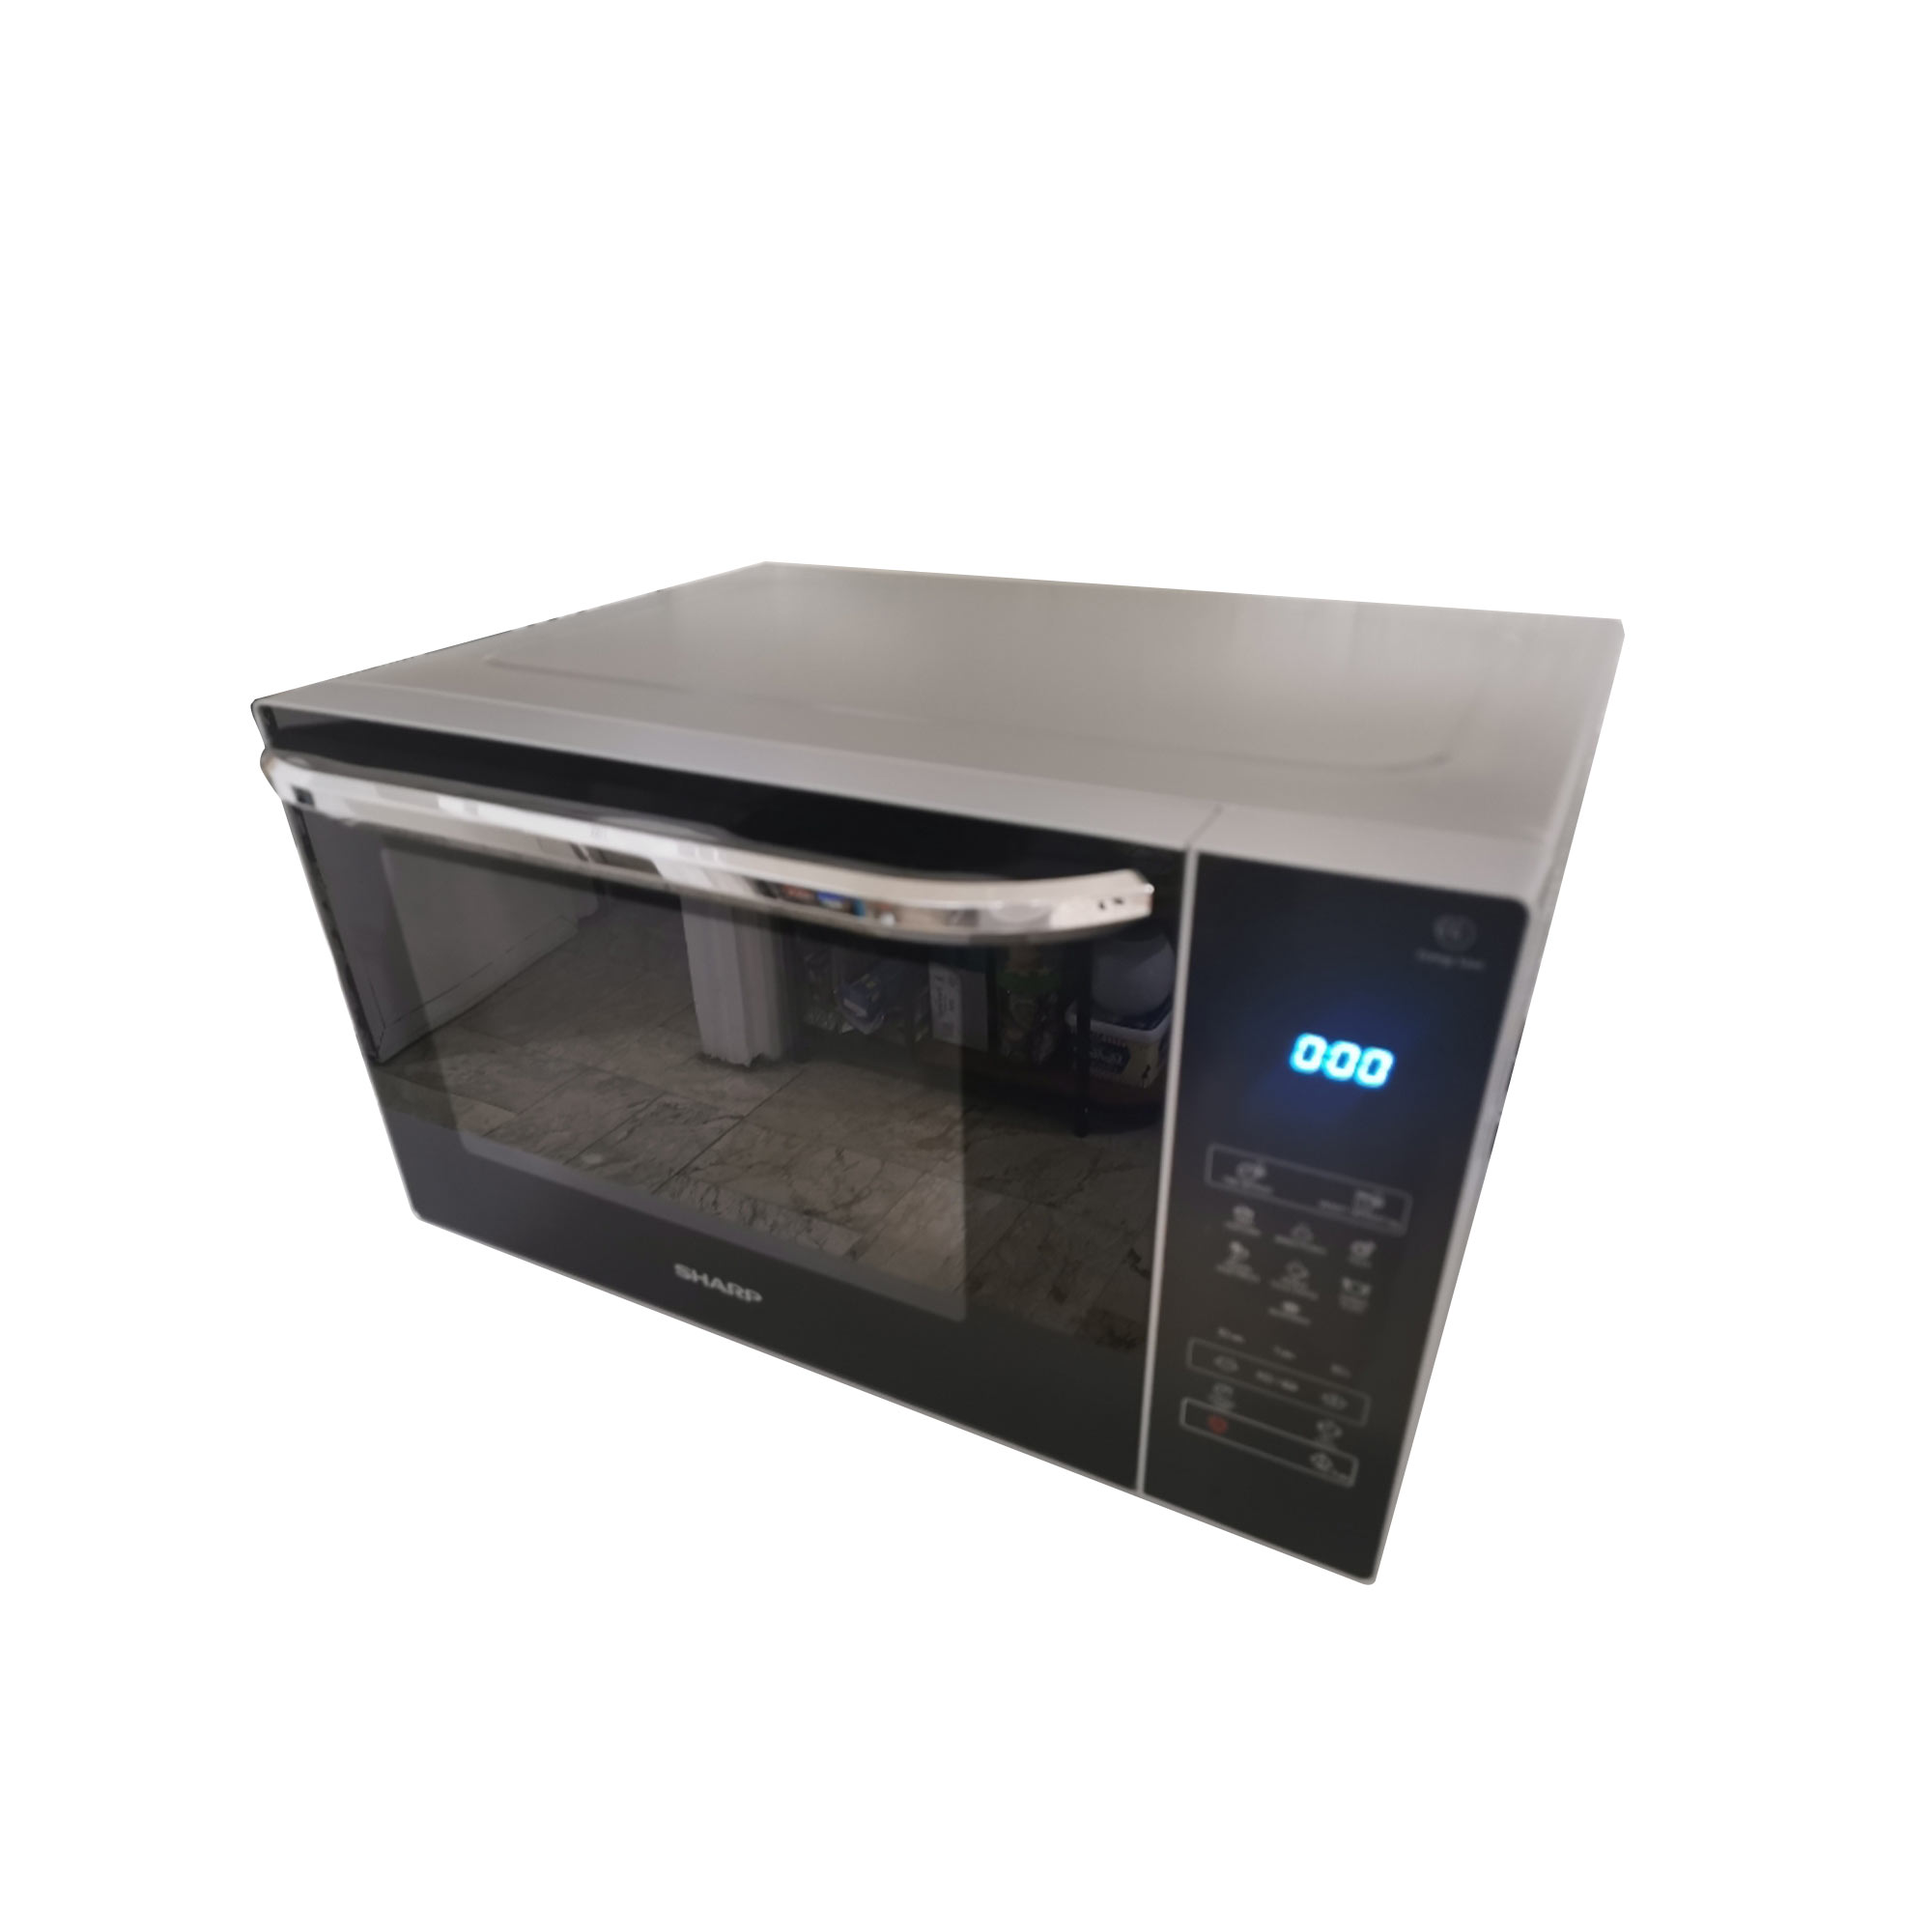 Sharp R-32E(S) 25 Liters Microwave Oven - Ansons